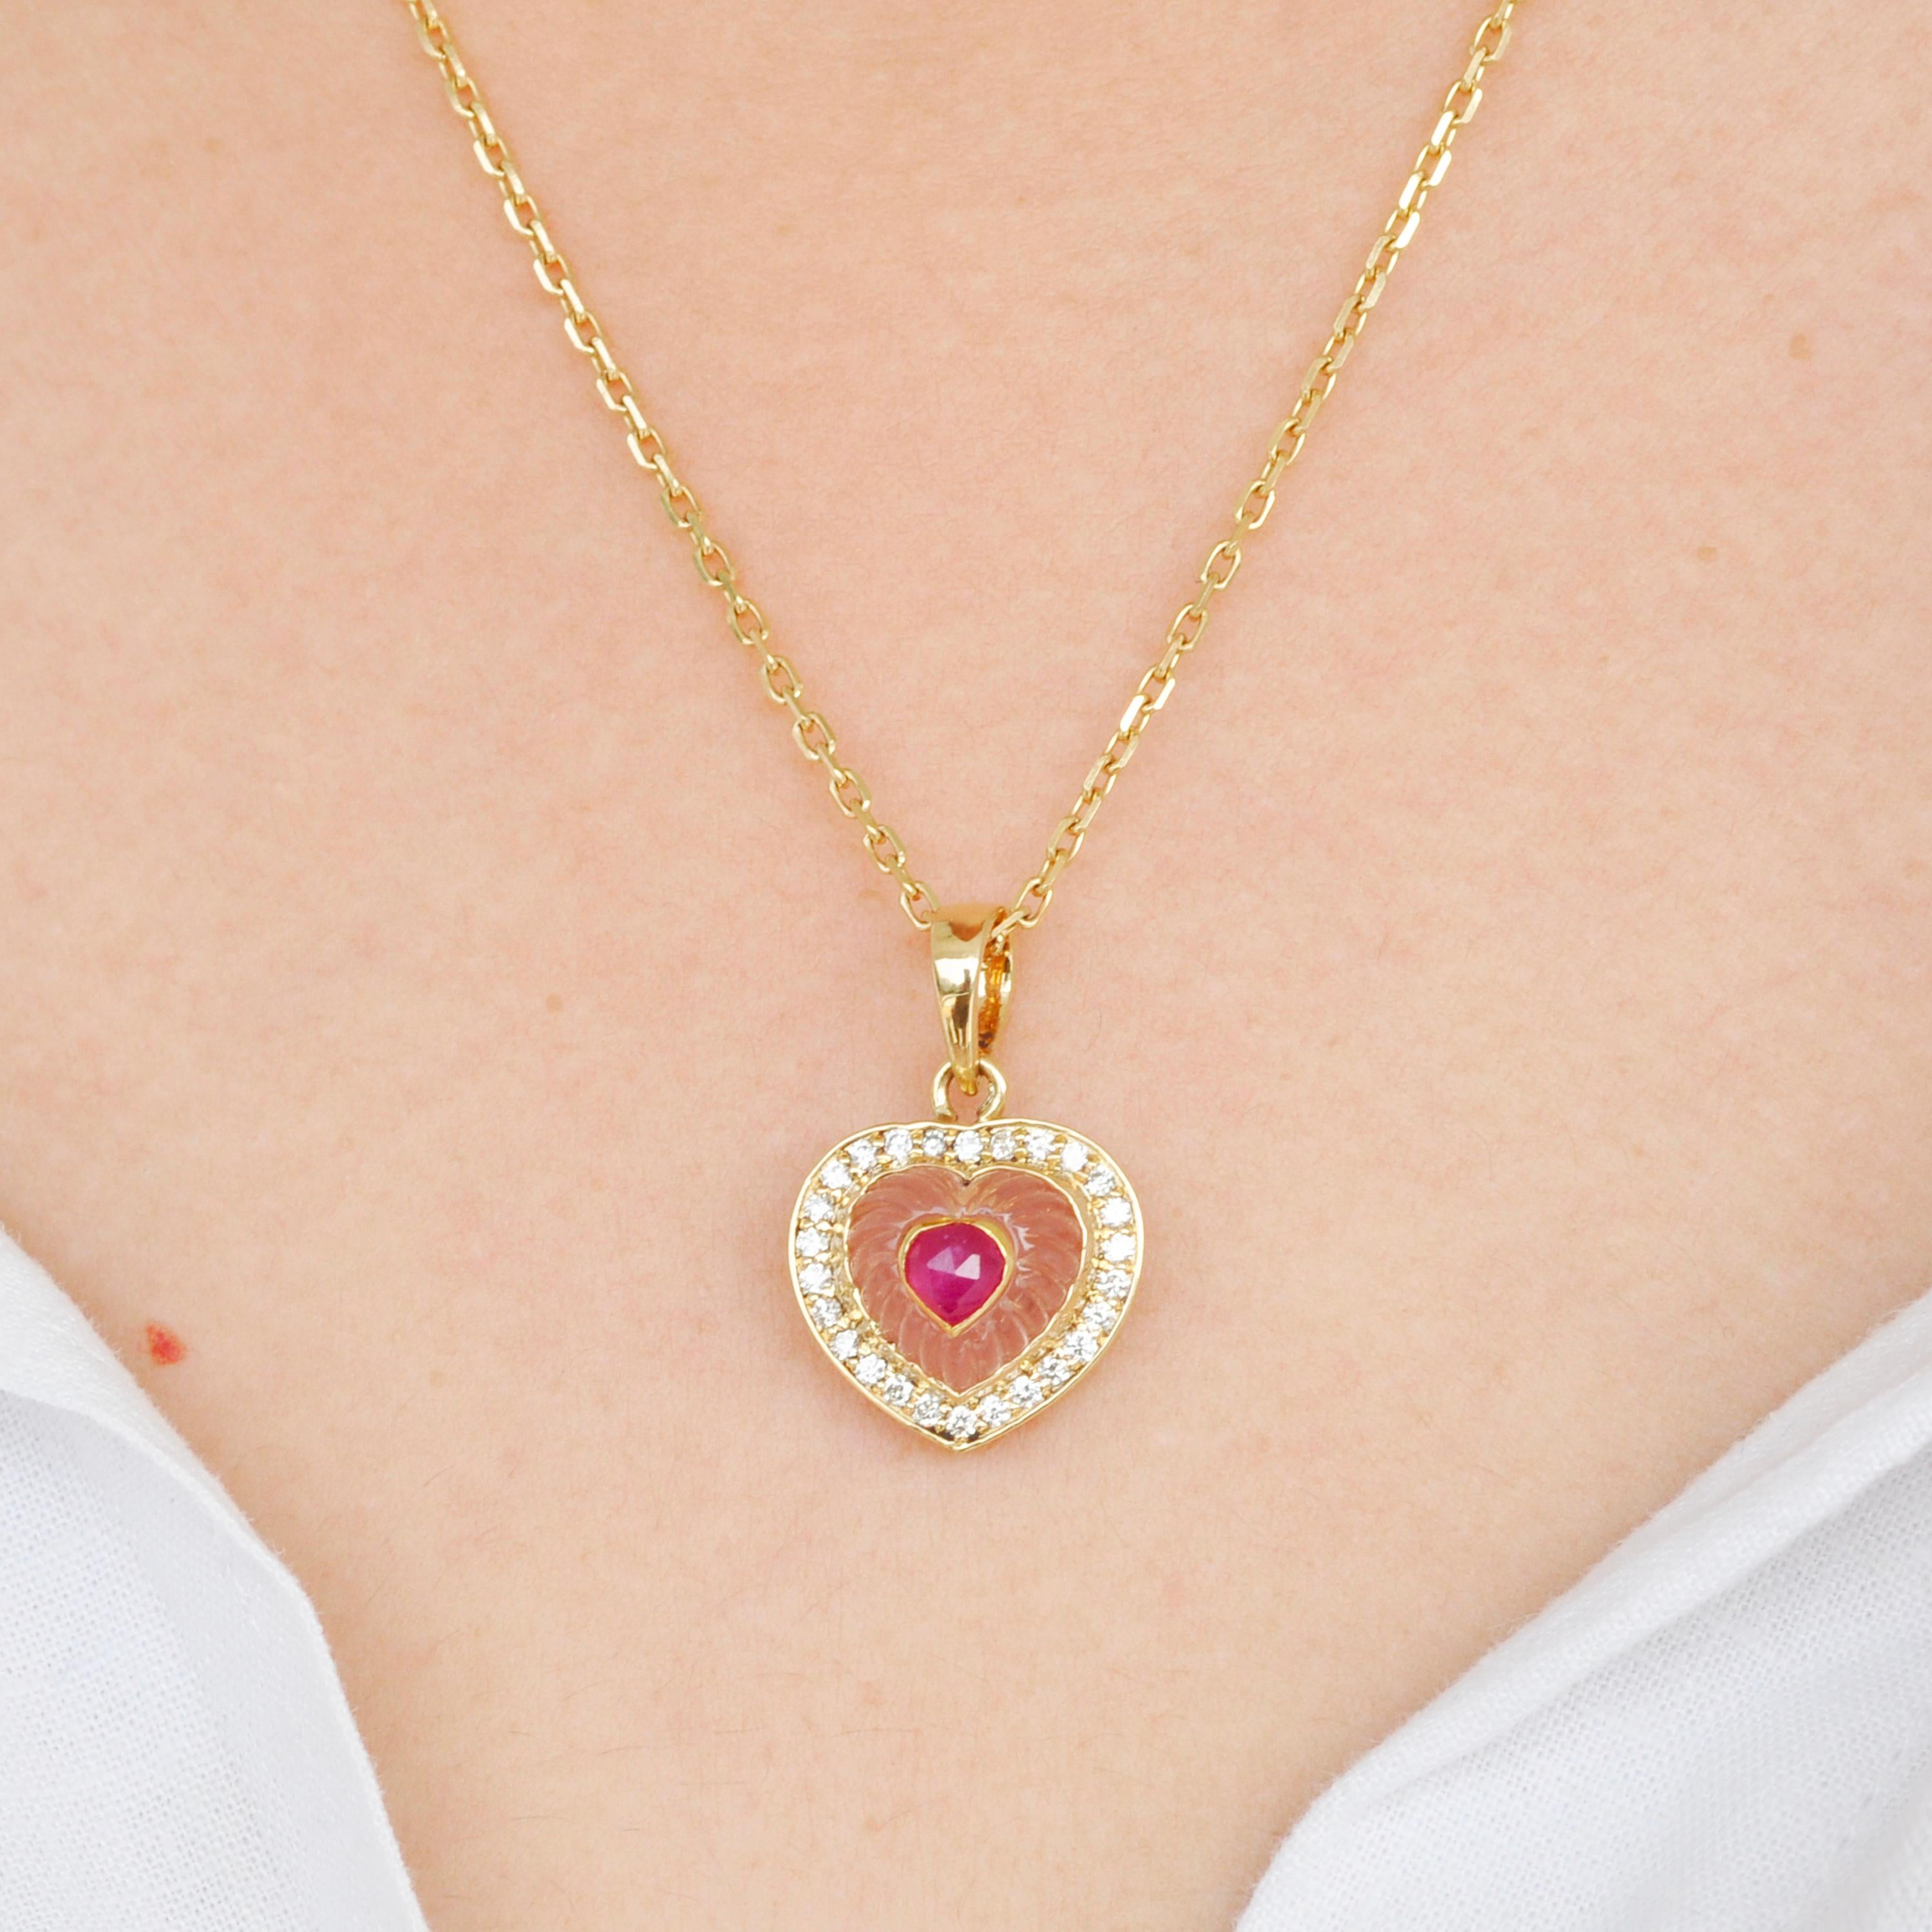 18 karat yellow gold heart rose quartz ruby diamond valentine pendant necklace

This beautiful elegant pendant features a natural Rose Quartz heart shaped carving at the centre, bezel set in 18 karat gold, with a heart shaped natural ruby set